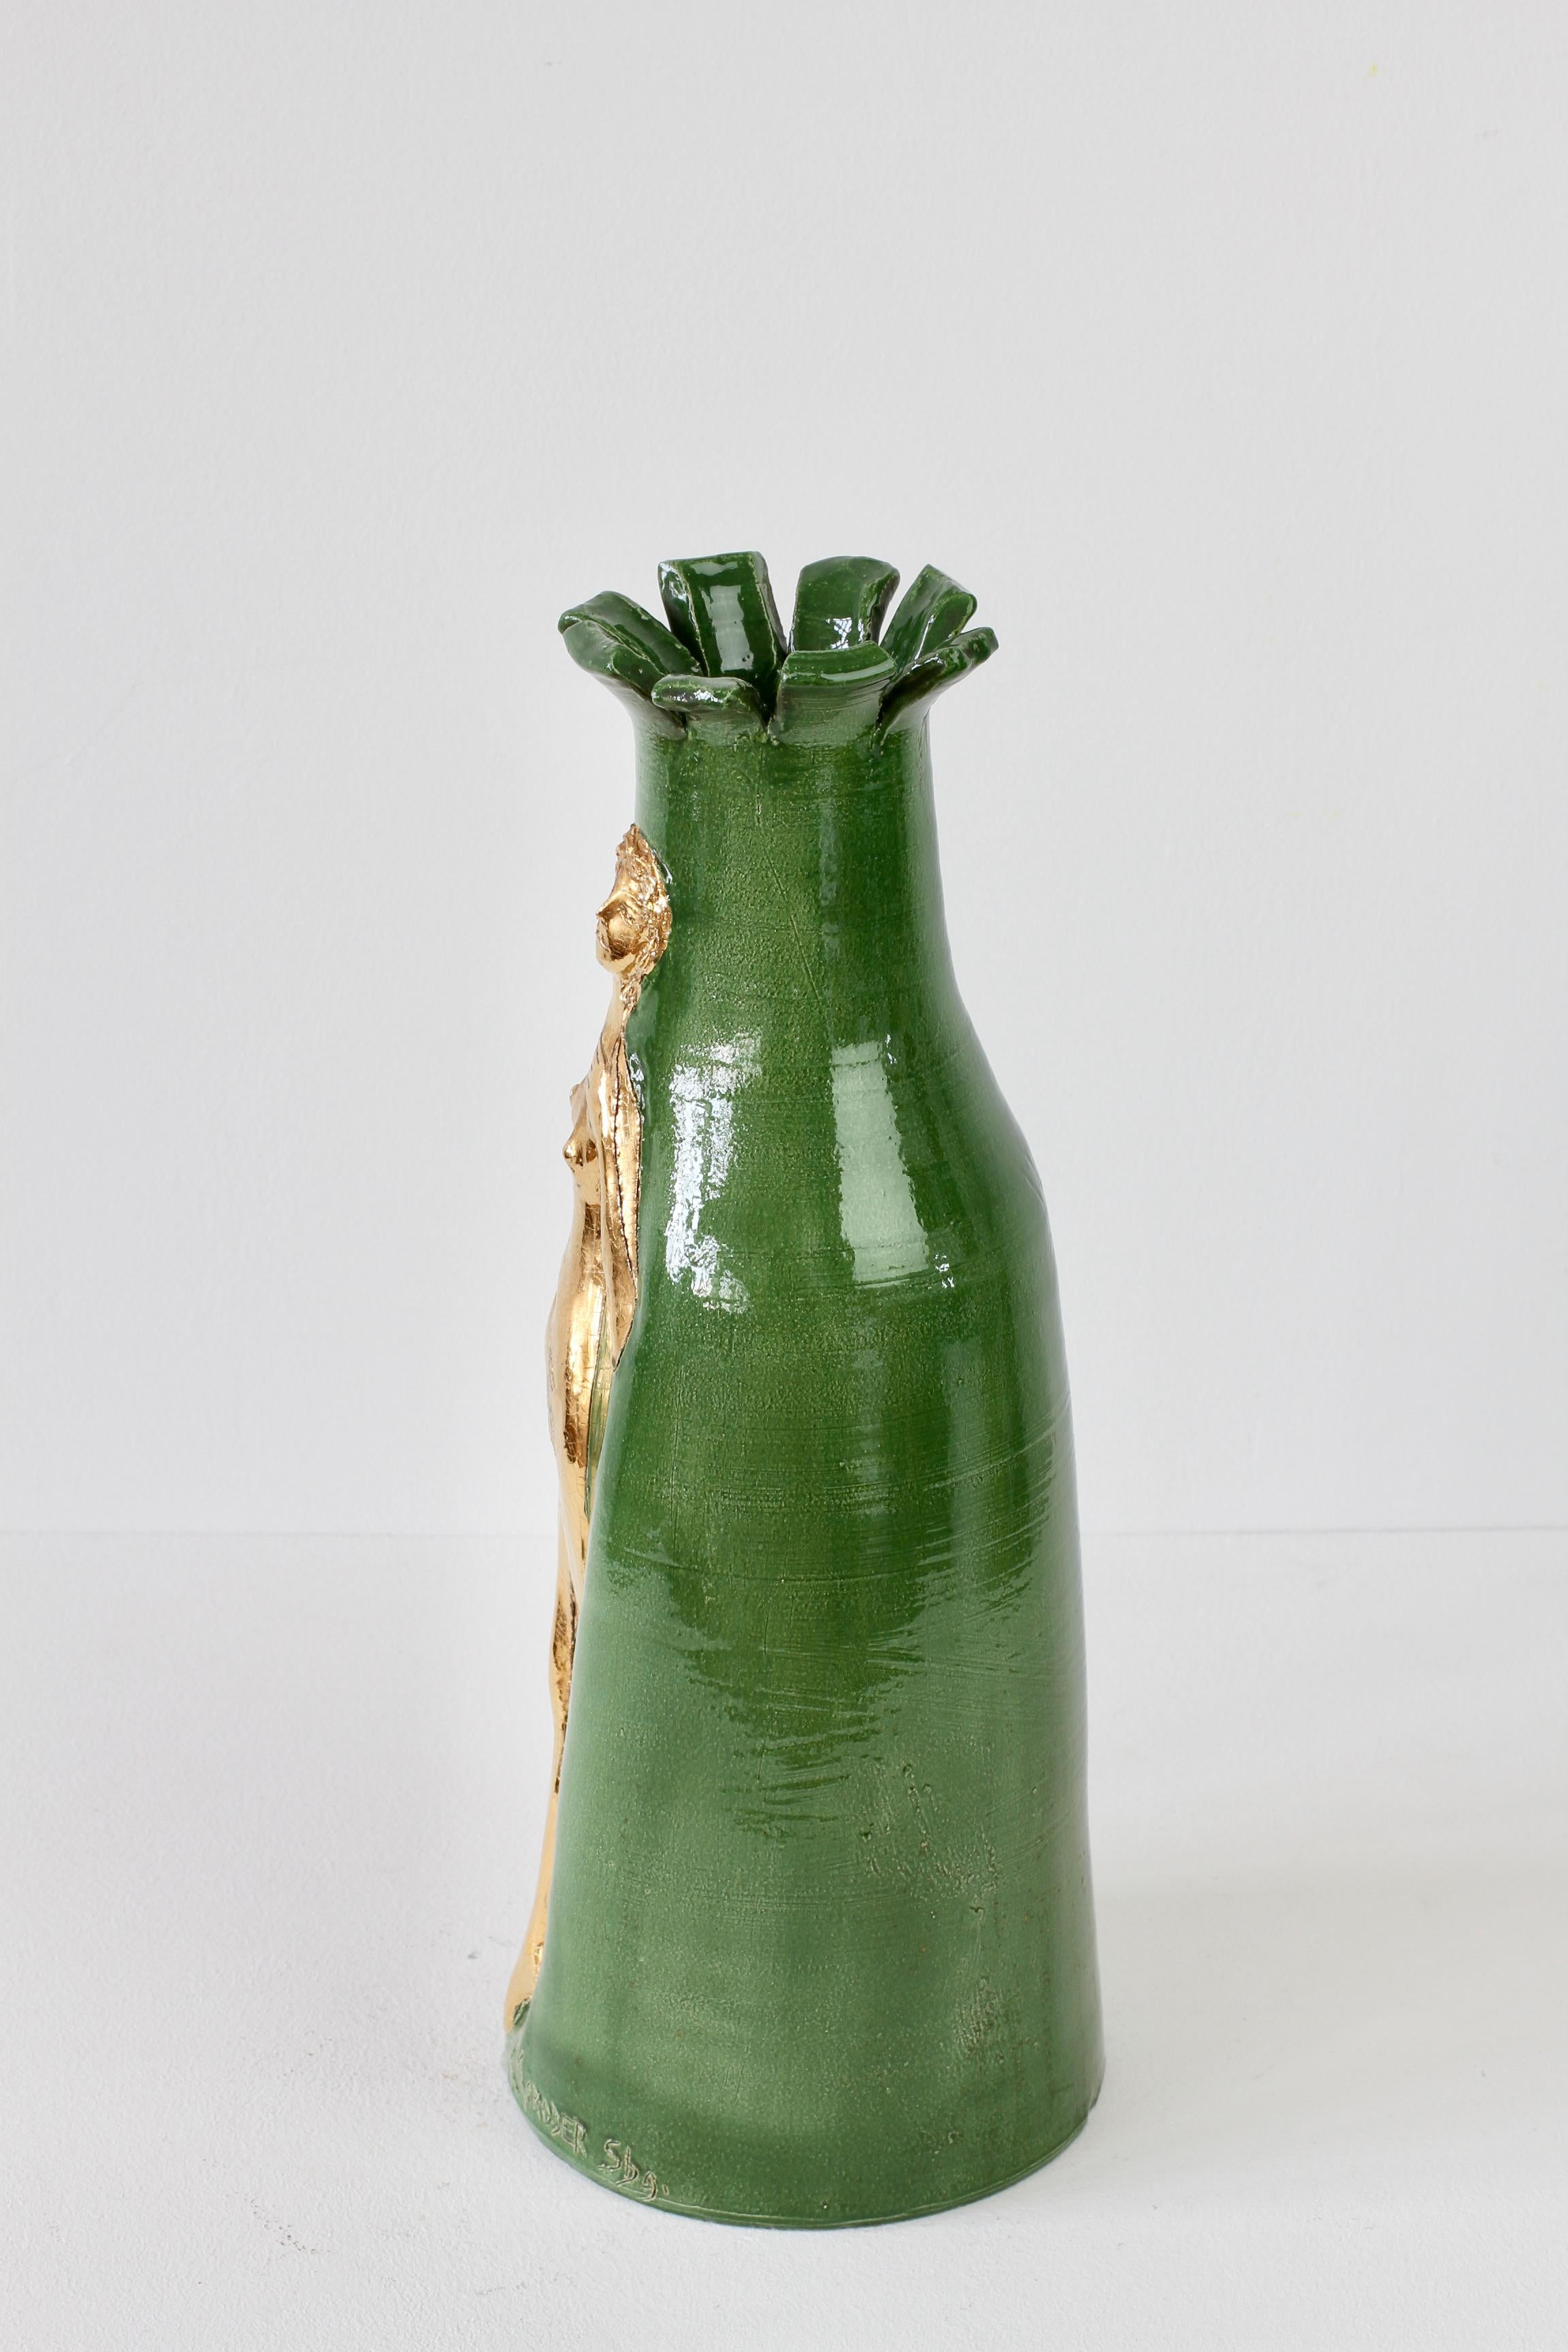 Hand-Crafted Rare and Important Tall Hand Thrown Vase by Claus Moroder, Austria circa 1960s